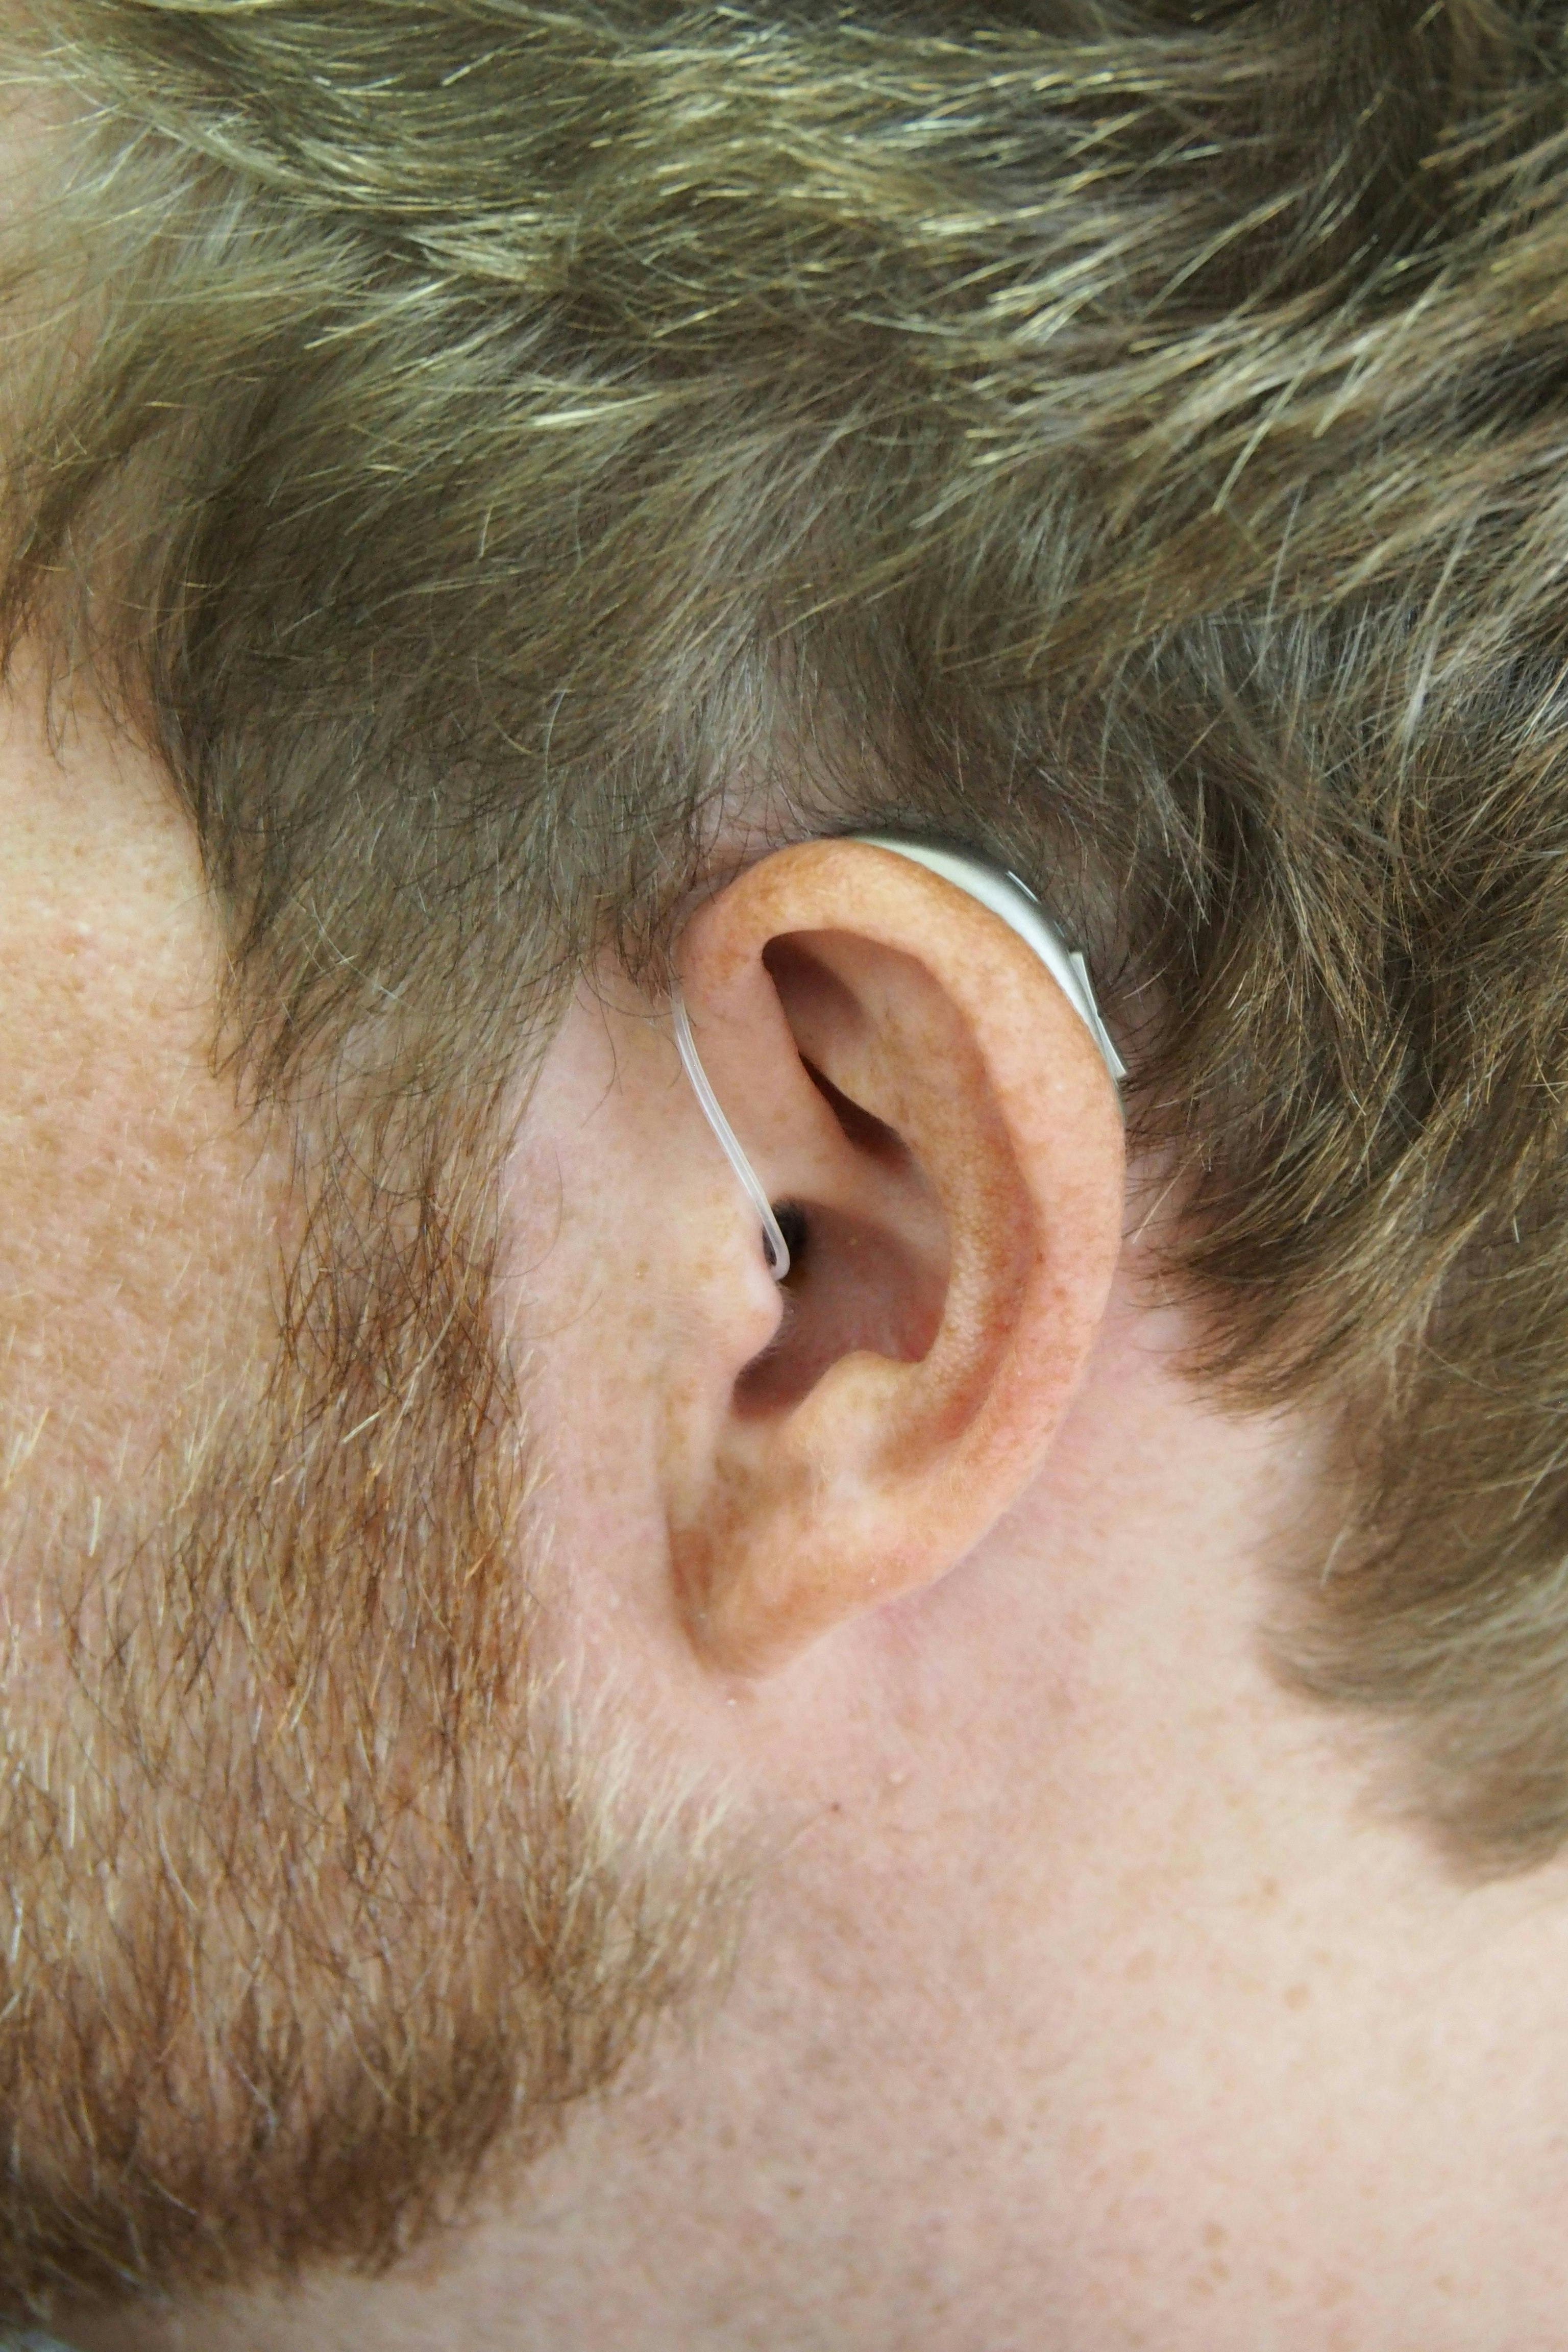 A close up of a man's ear with a hearing aid fitted